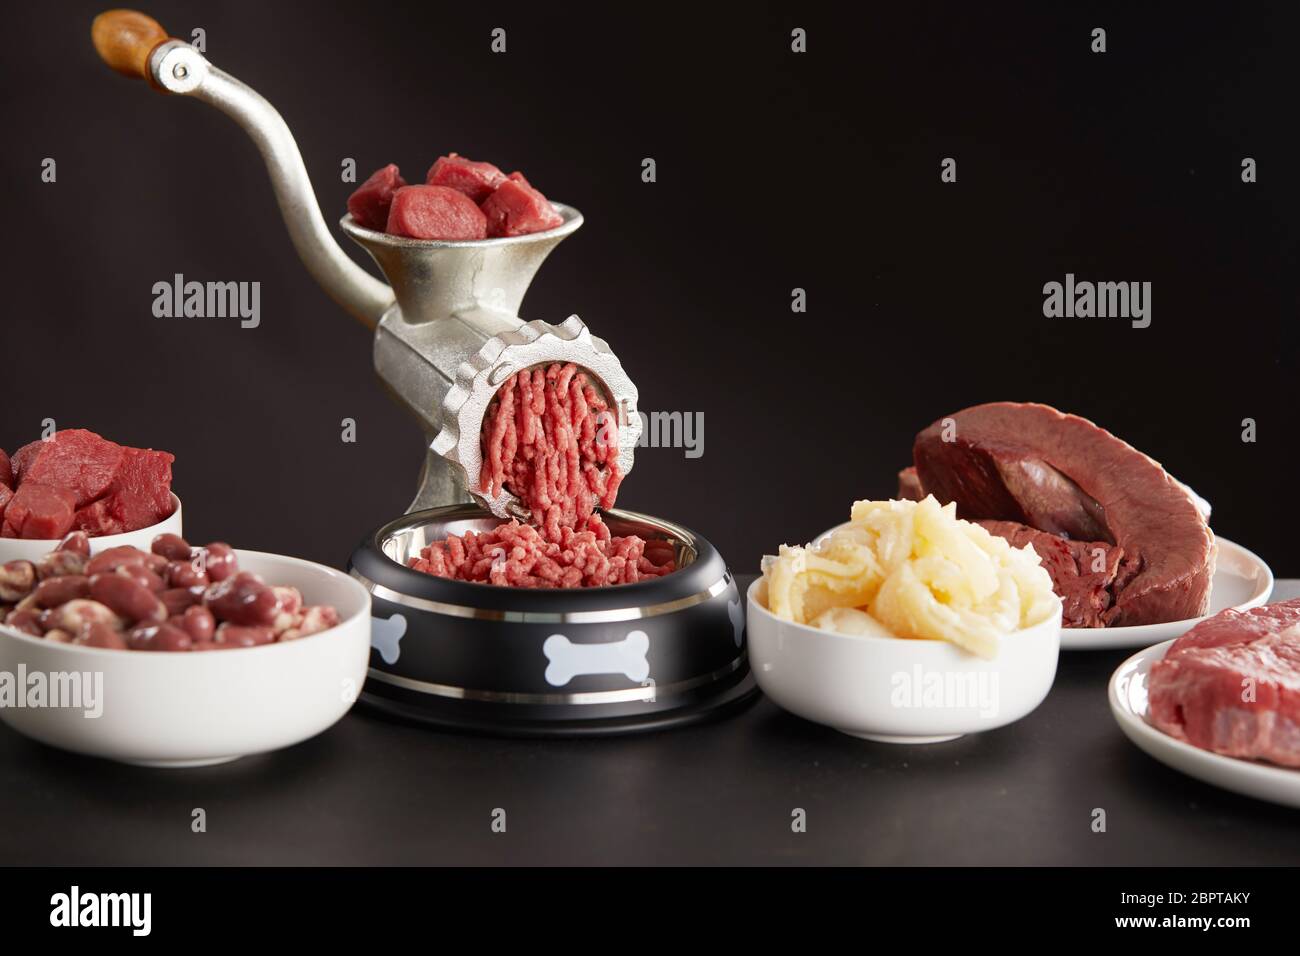 https://c8.alamy.com/comp/2BPTAKY/preparing-fresh-raw-meat-for-barf-dog-food-with-a-mix-of-poultry-heart-stomach-lungs-offal-and-beef-being-minced-in-an-old-grinder-2BPTAKY.jpg